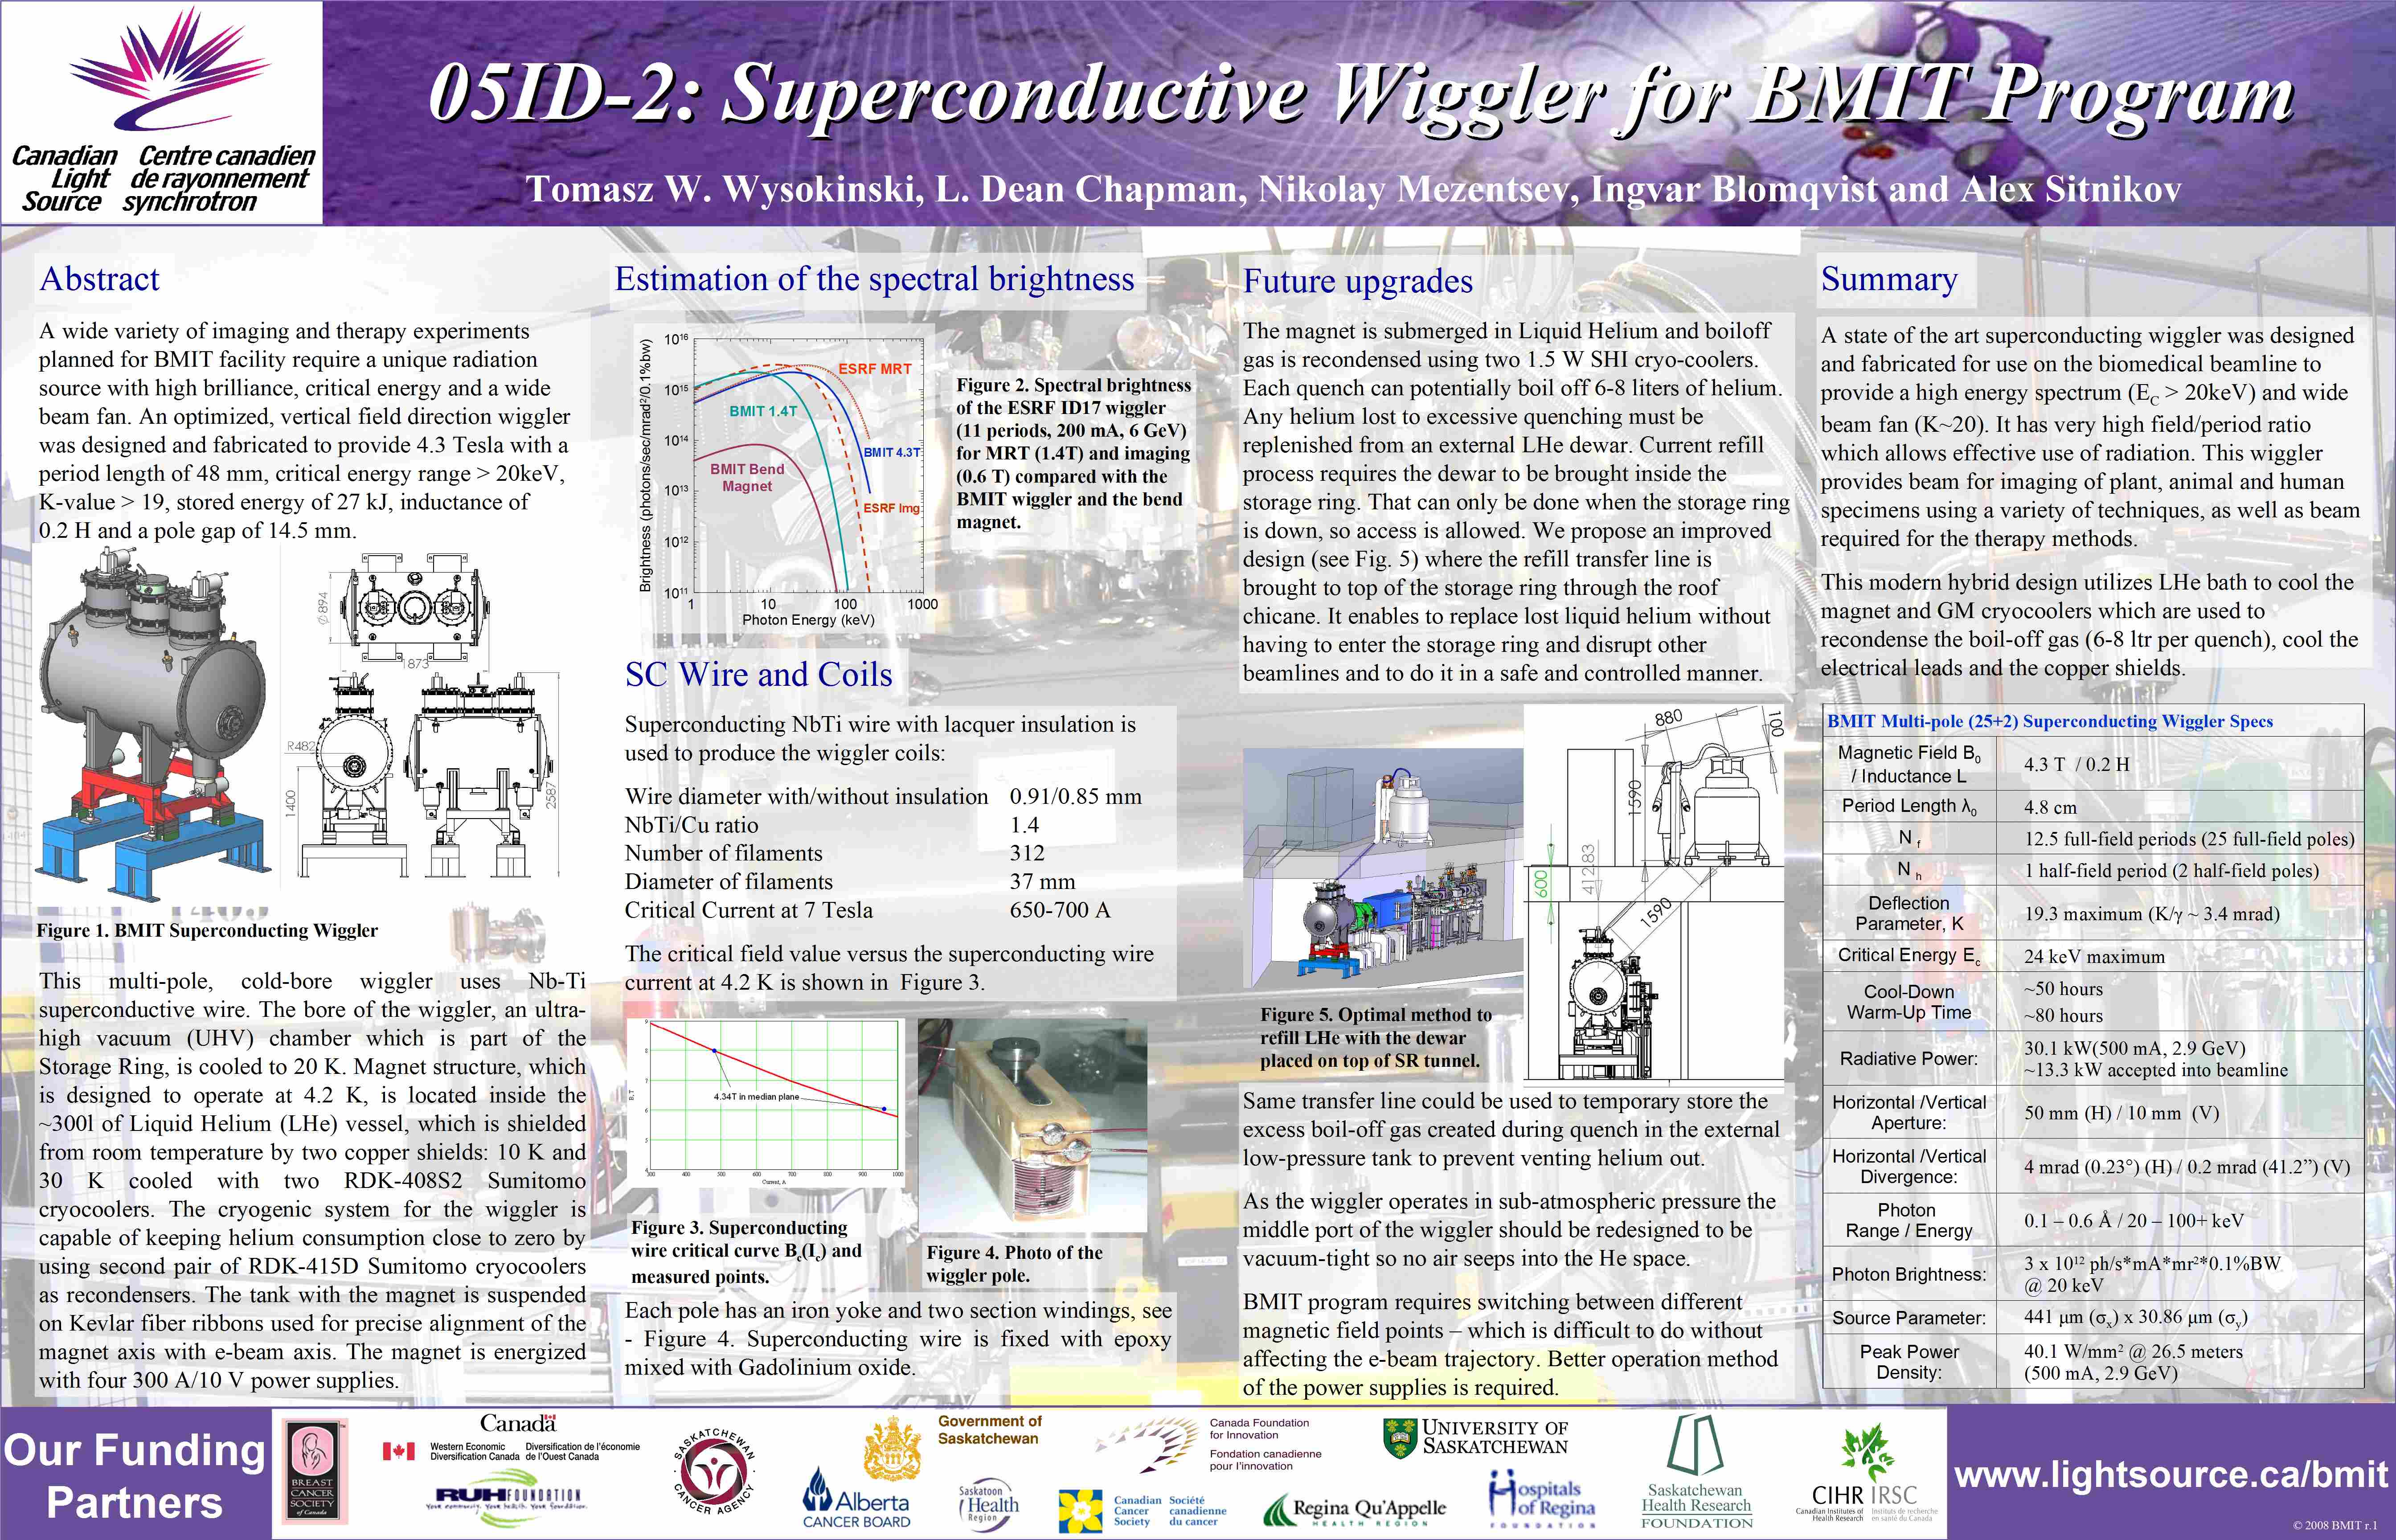 05ID-2: Superconductive Wiggler for BMIT Program Image